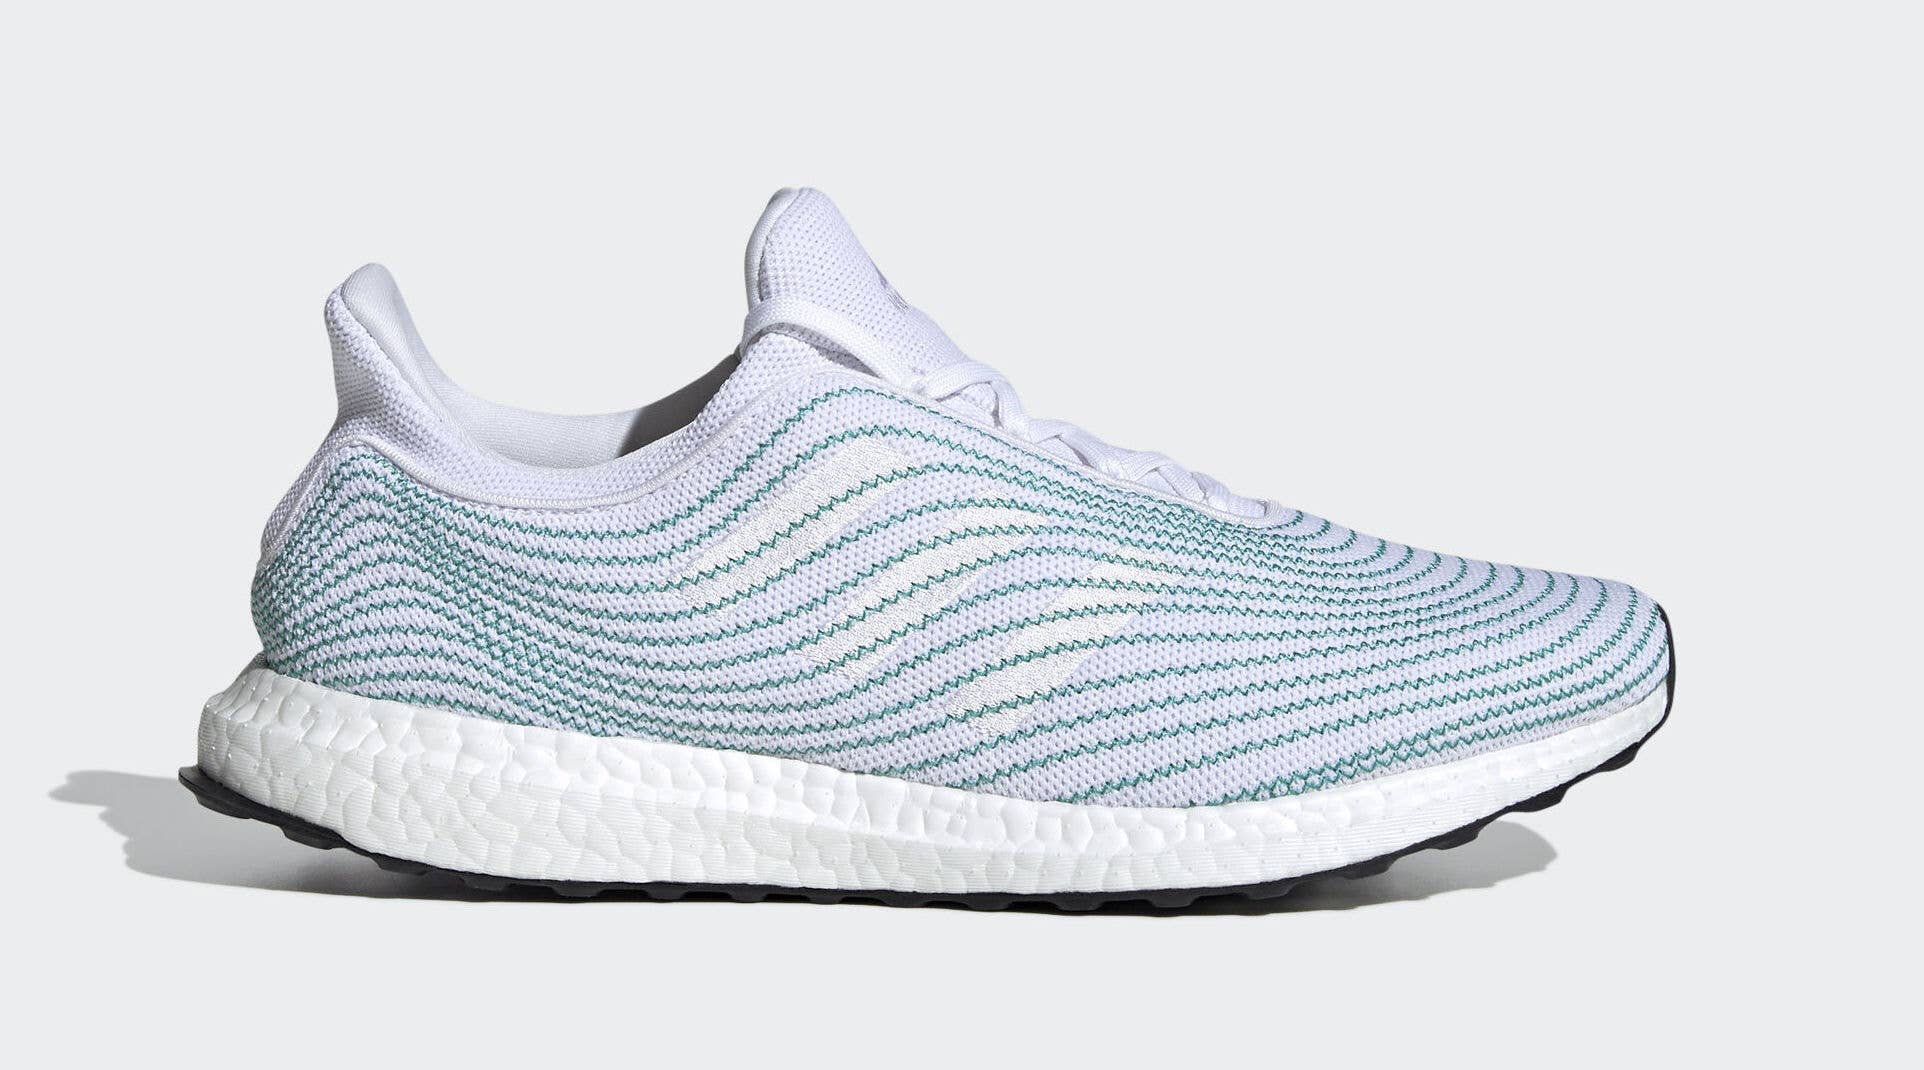 Parley x Adidas Ultra Boost Uncaged EH1173 Lateral